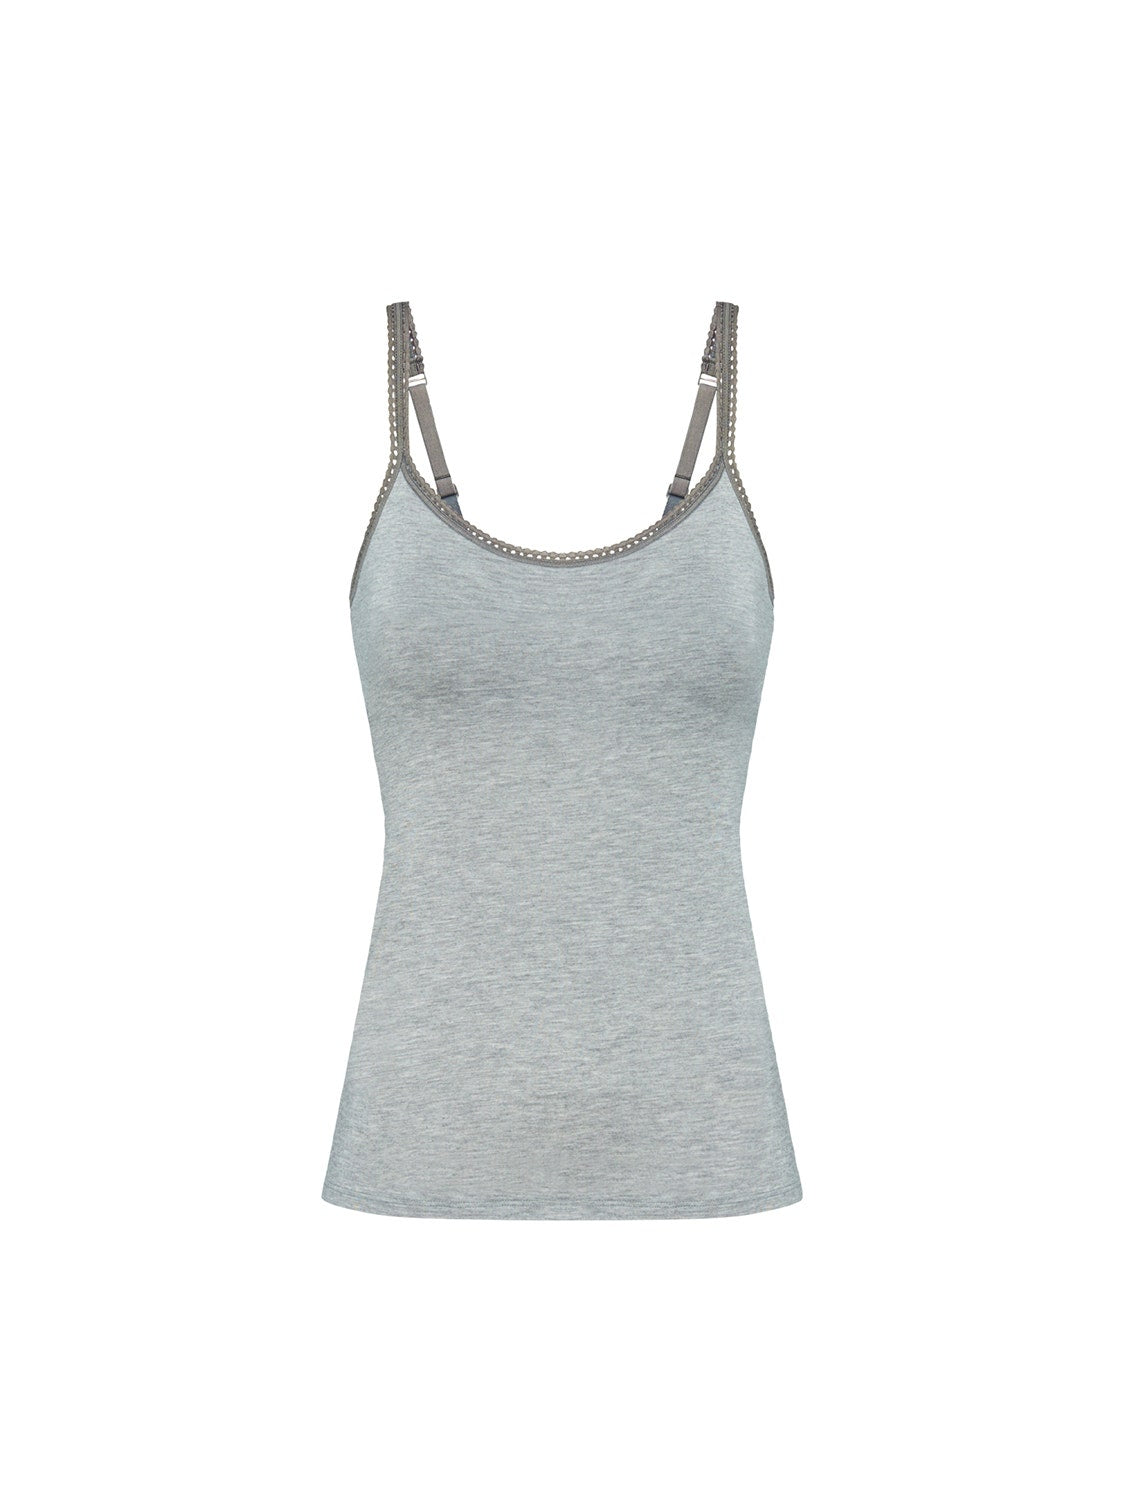 top-mottled-grey-illusion-40